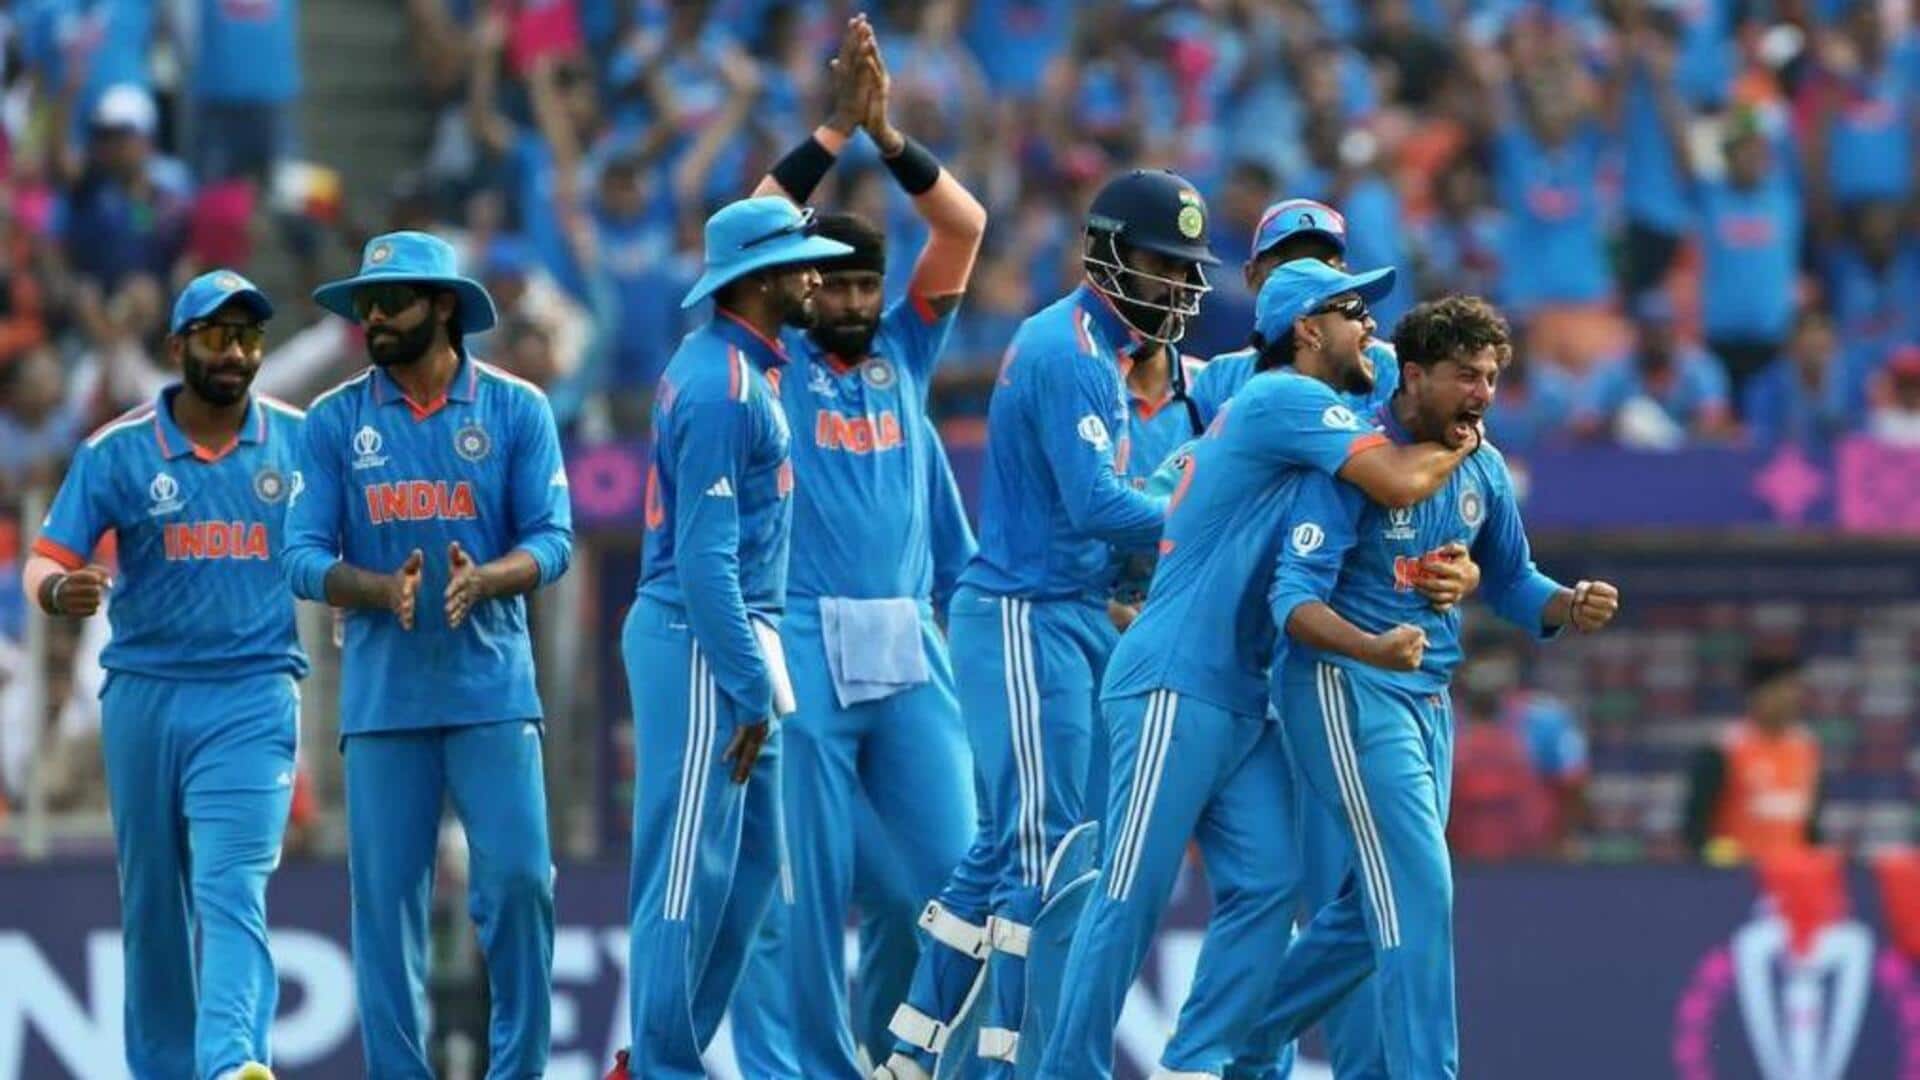 ICC Cricket World Cup, India vs Bangladesh: Statistical preview